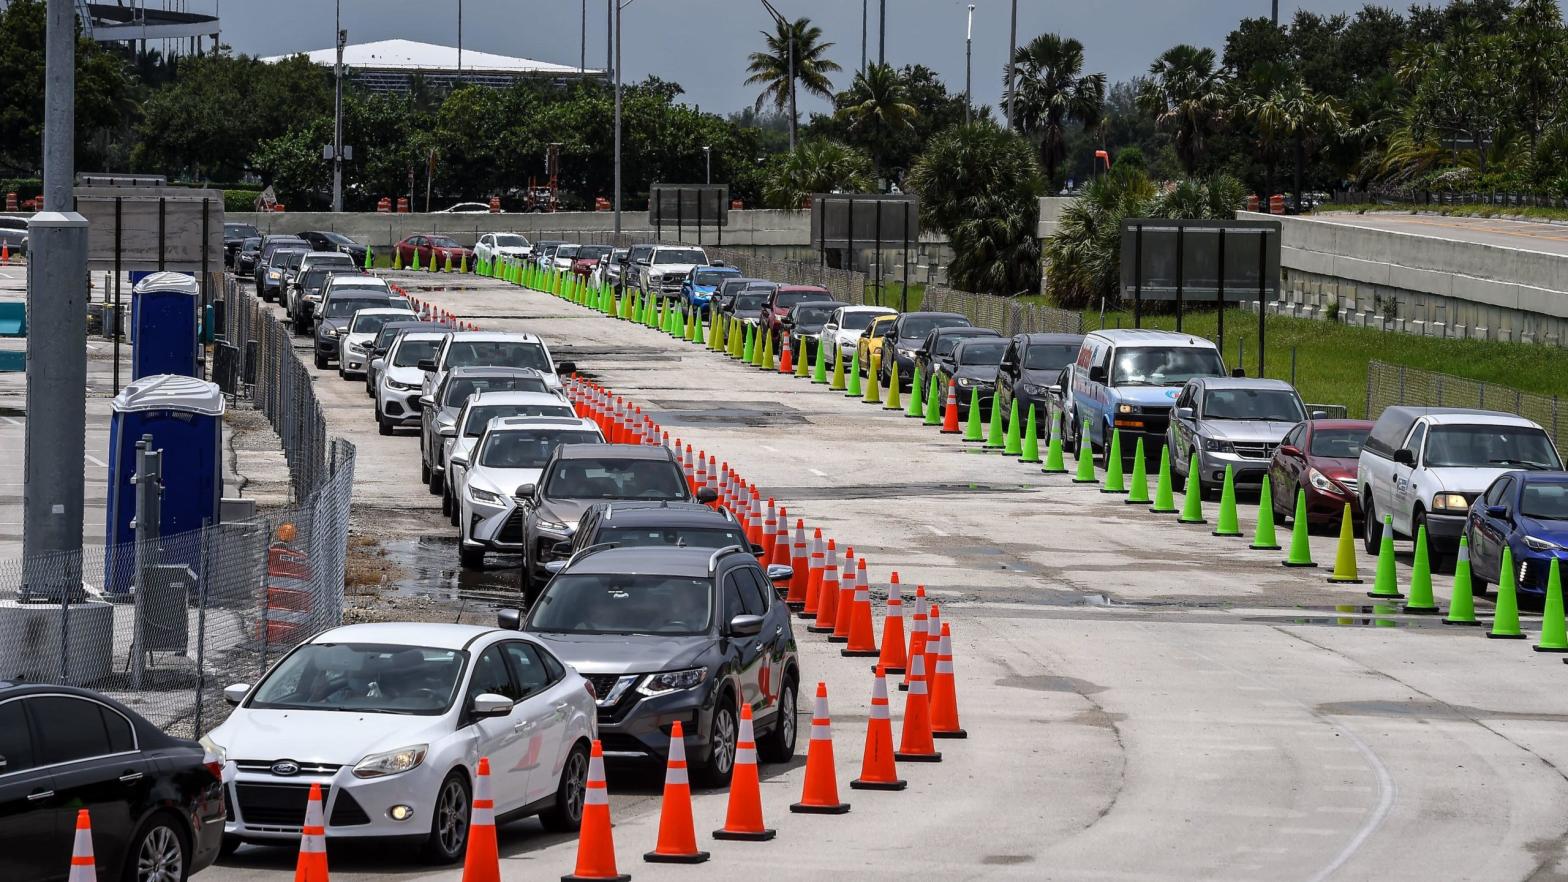 Cars line up for coronavirus testing site at Hard Rock Stadium in Miami Gardens near Miami, on August 5, 2020. (Photo: Chandan Khanna, Getty Images)